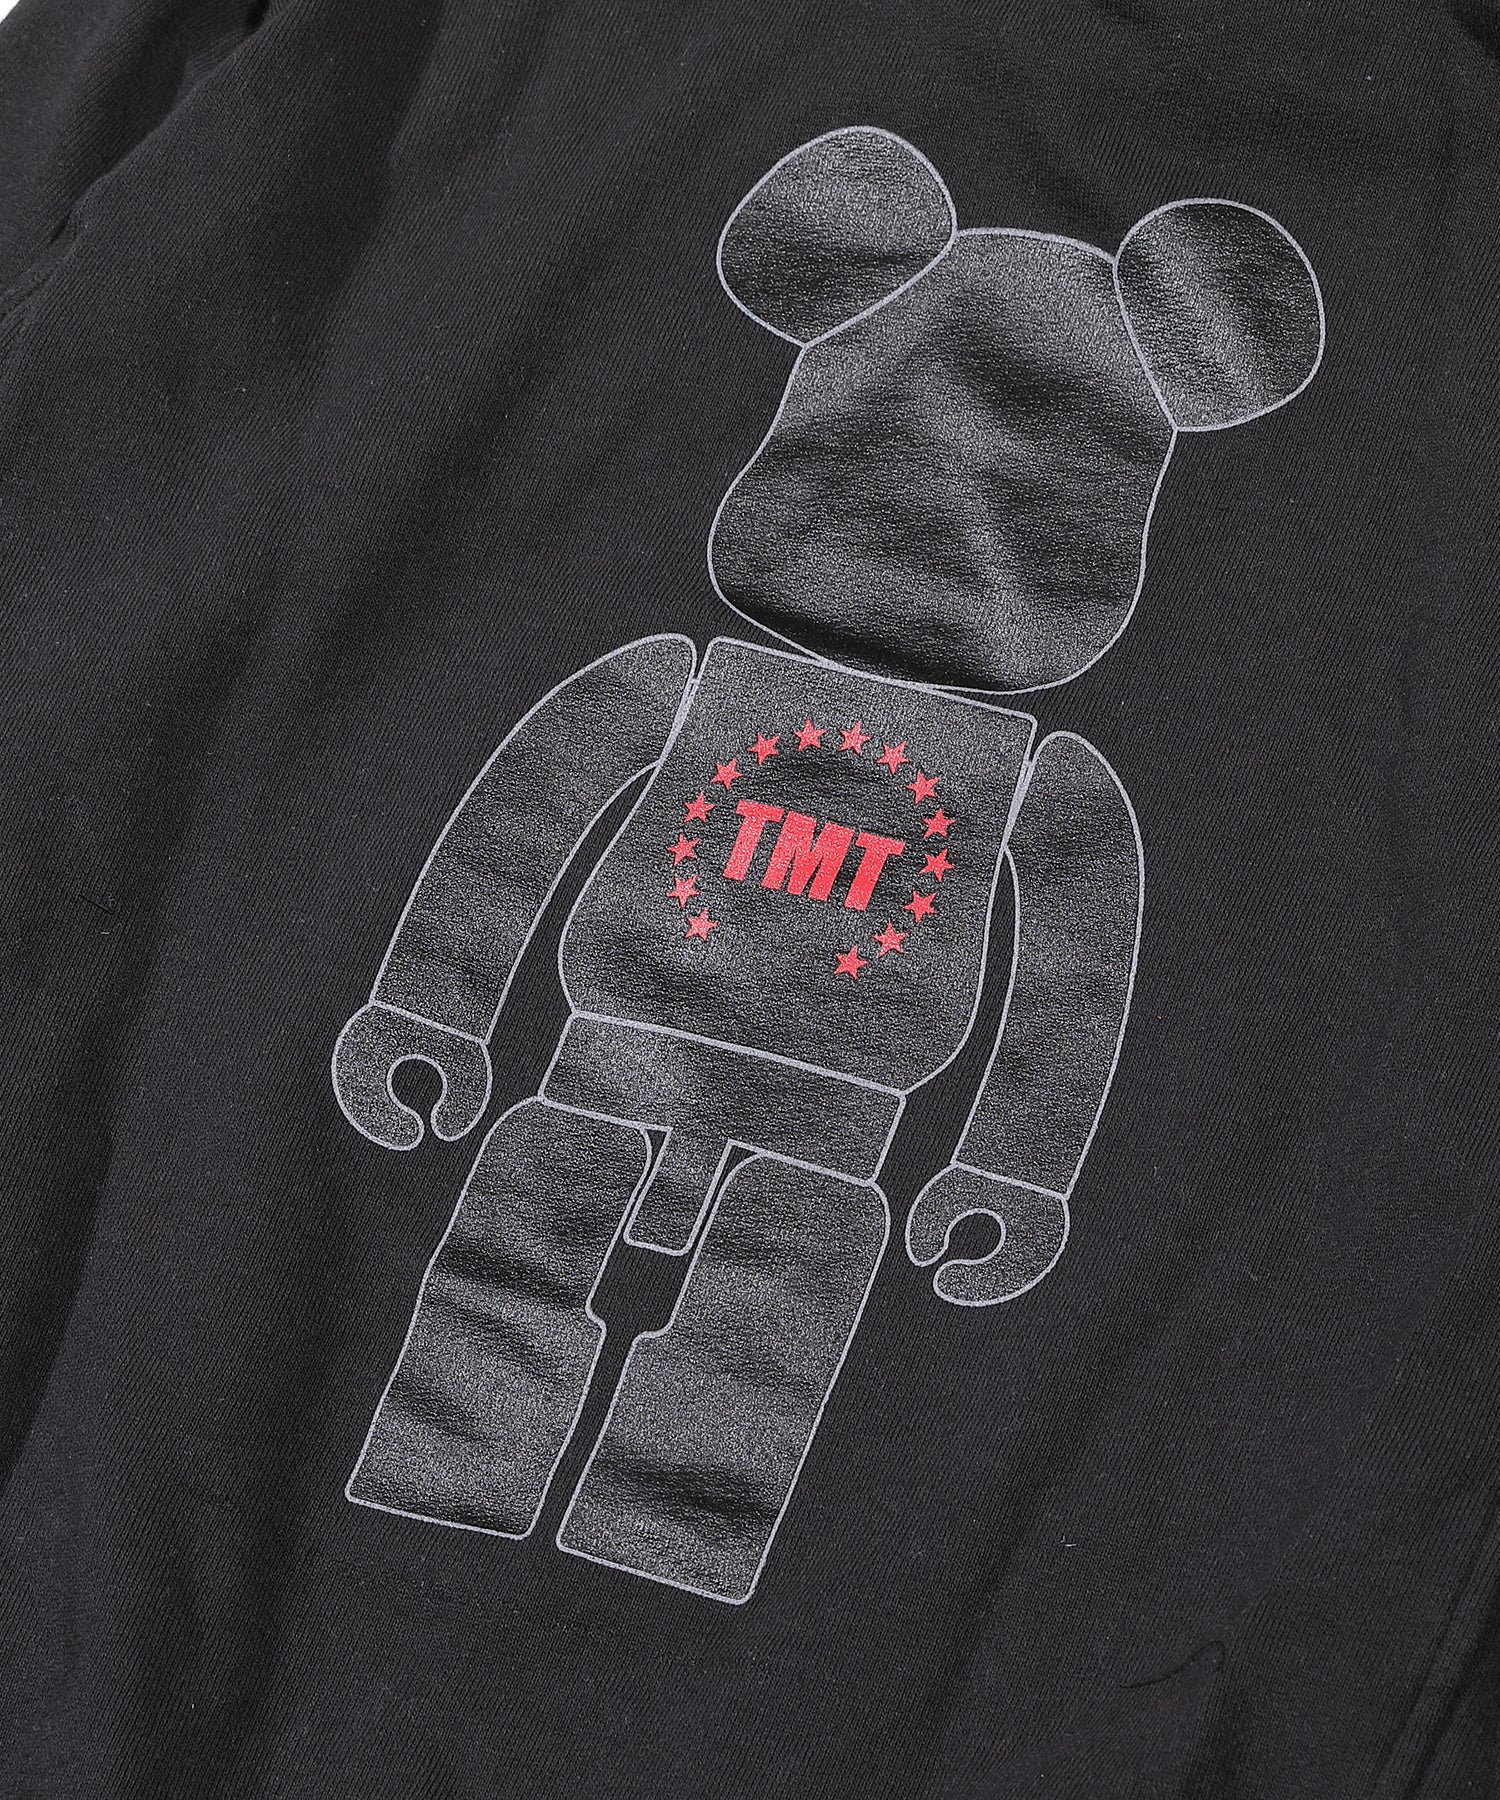 TMT VINTAGE FRENCH TERRY PULLOVER HOODIE